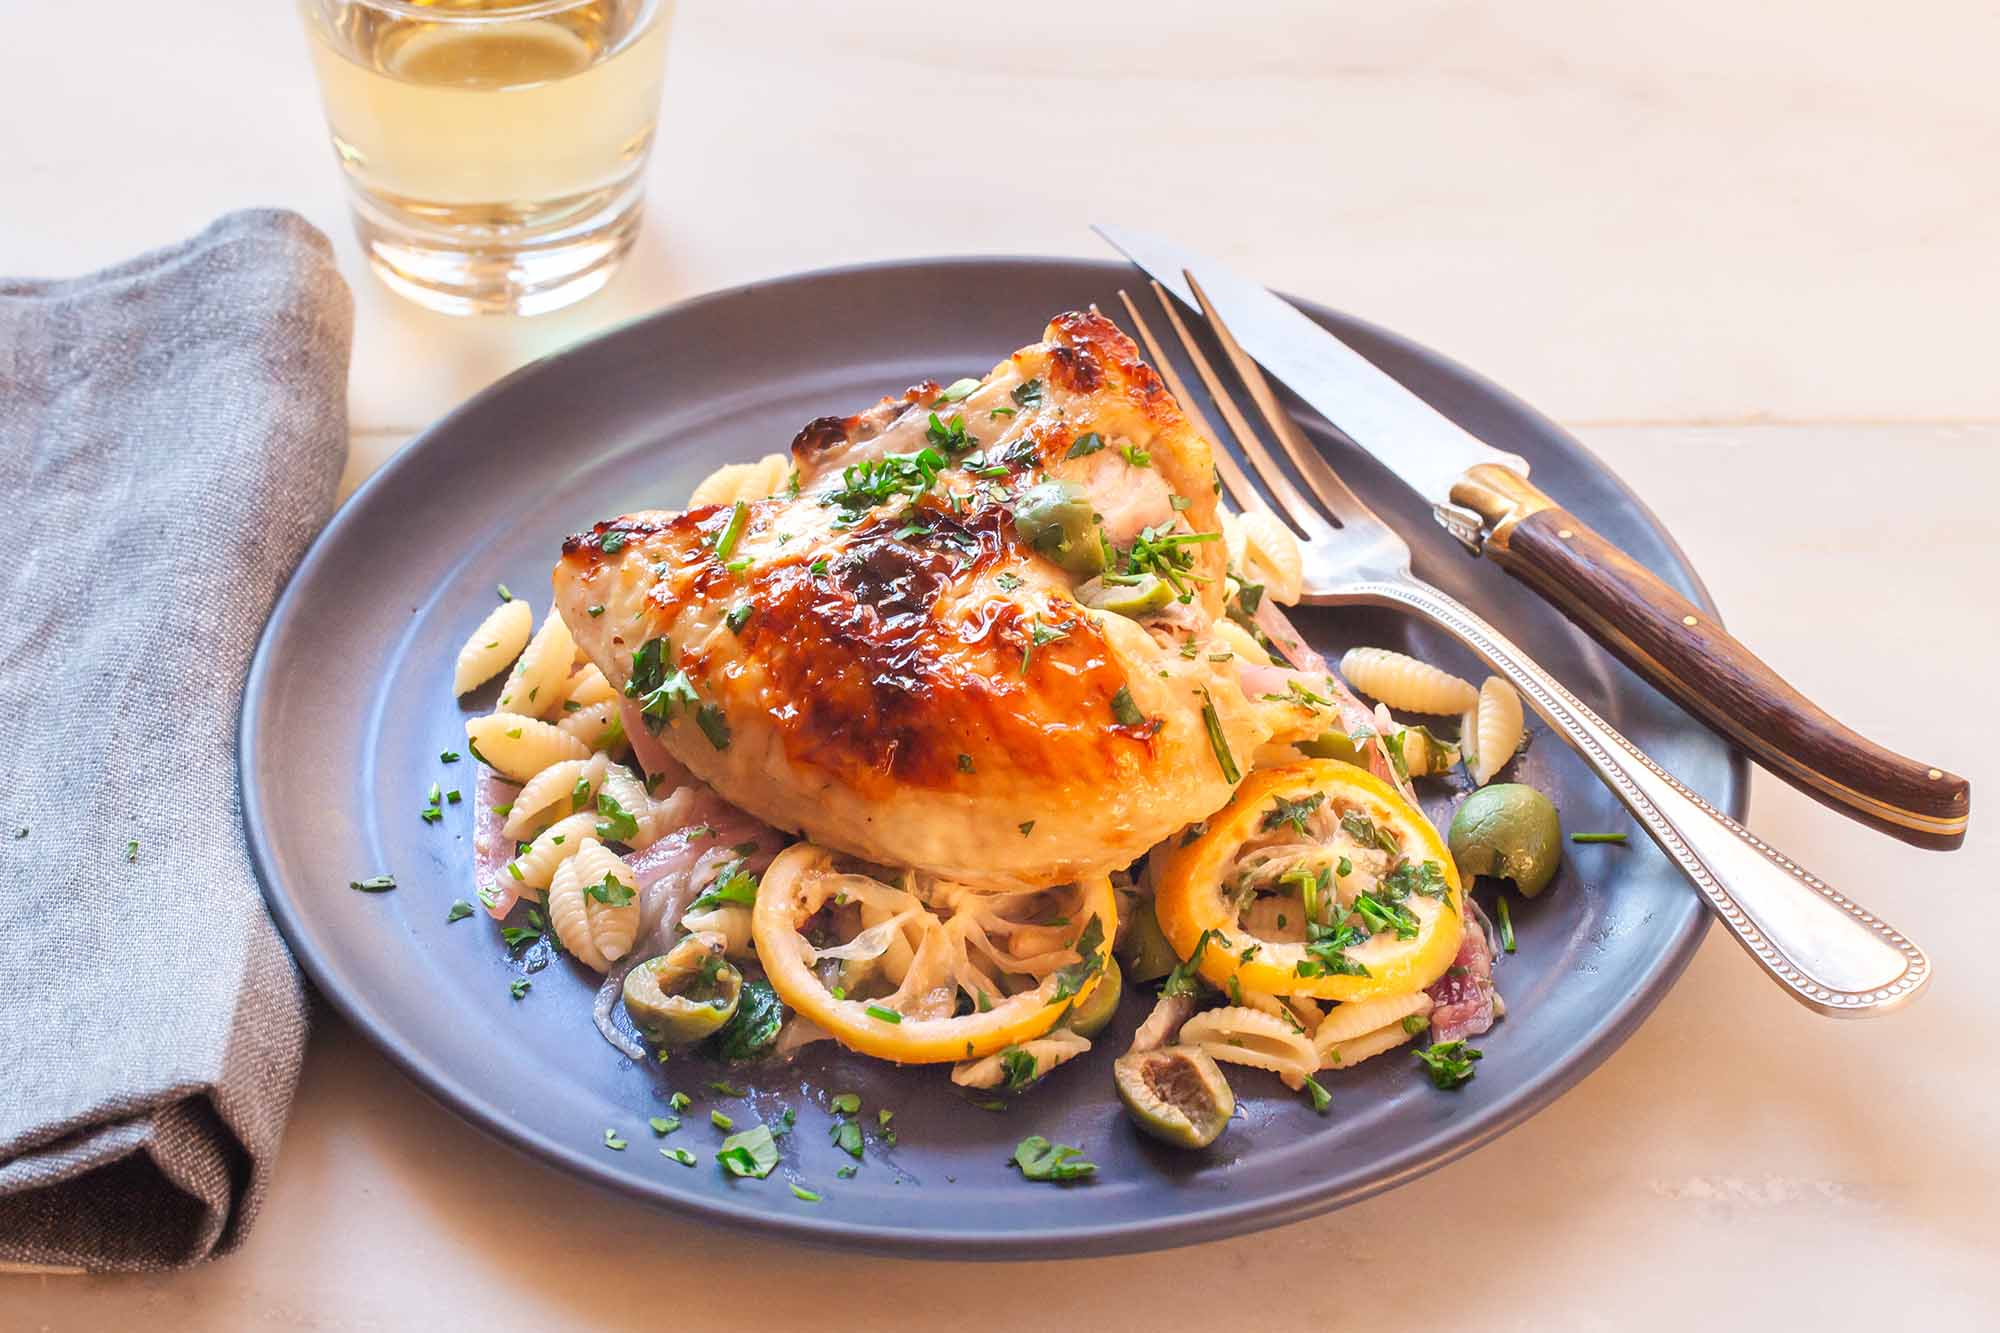 Yogurt marinated lemon chicken with pasta, olives and herbs on a rimmed plate. A fork and knife rest on the right edge of the slate plate. A grey linen is folded to the left of the plate an a tumbler of white wine is above the plate to the left.